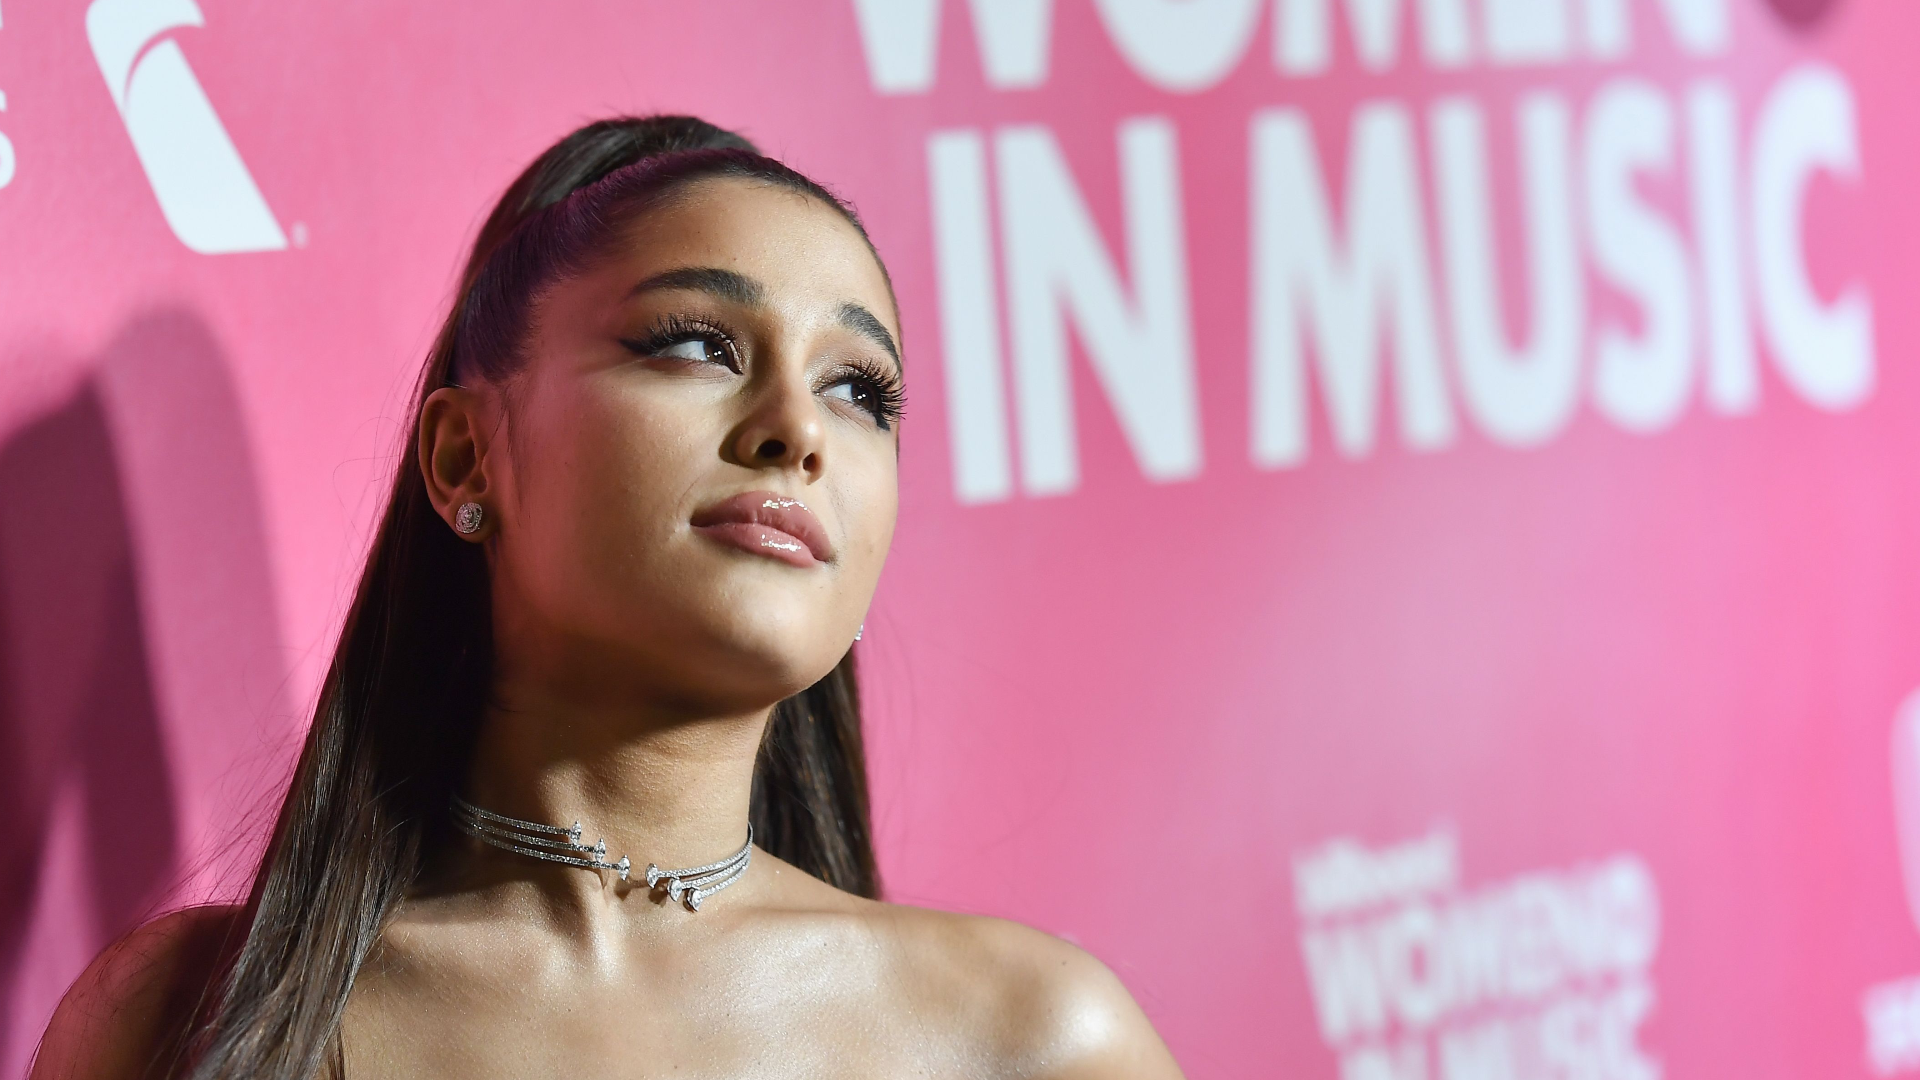 how much money does ariana grande make per month